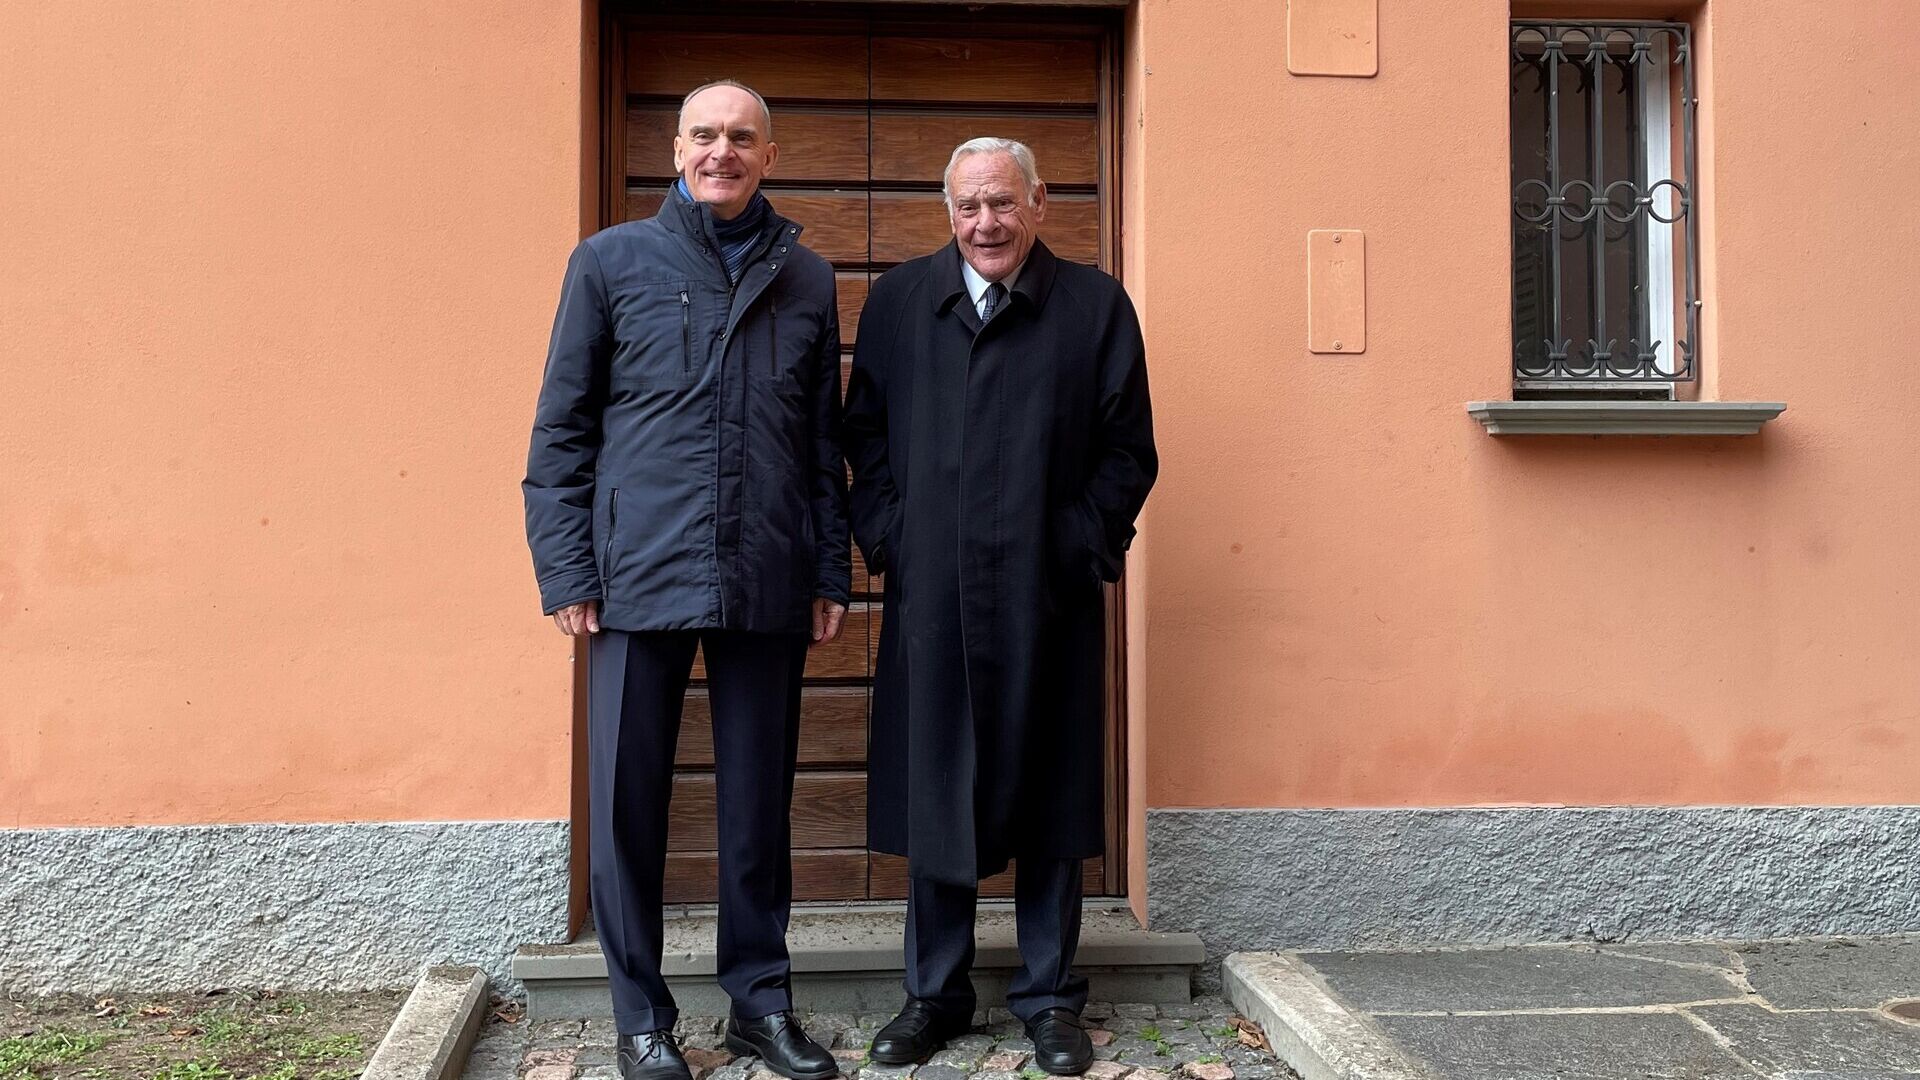 Human and natural sciences: Roberto Badaracco, Municipal of Lugano, and Arturo Licenziati, President and CEO of the IBSA Group, at the entrance to Casa Carlo Cattaneo on Christmas Eve 2022